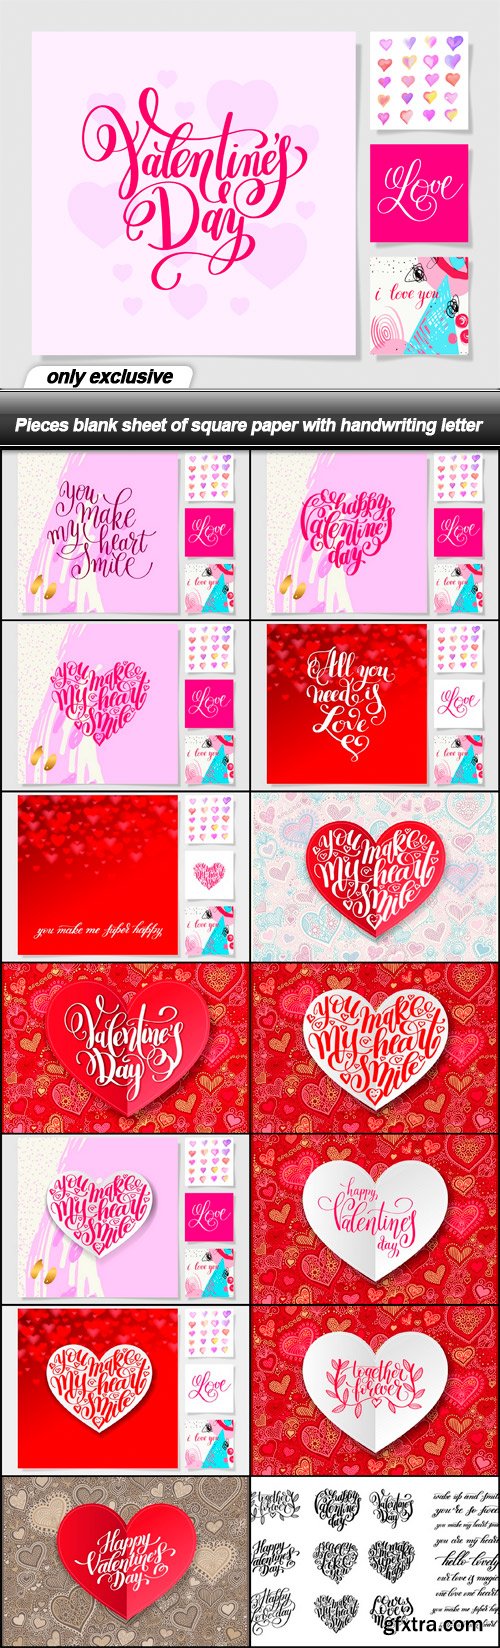 Pieces blank sheet of square paper with handwriting letter - 15 EPS